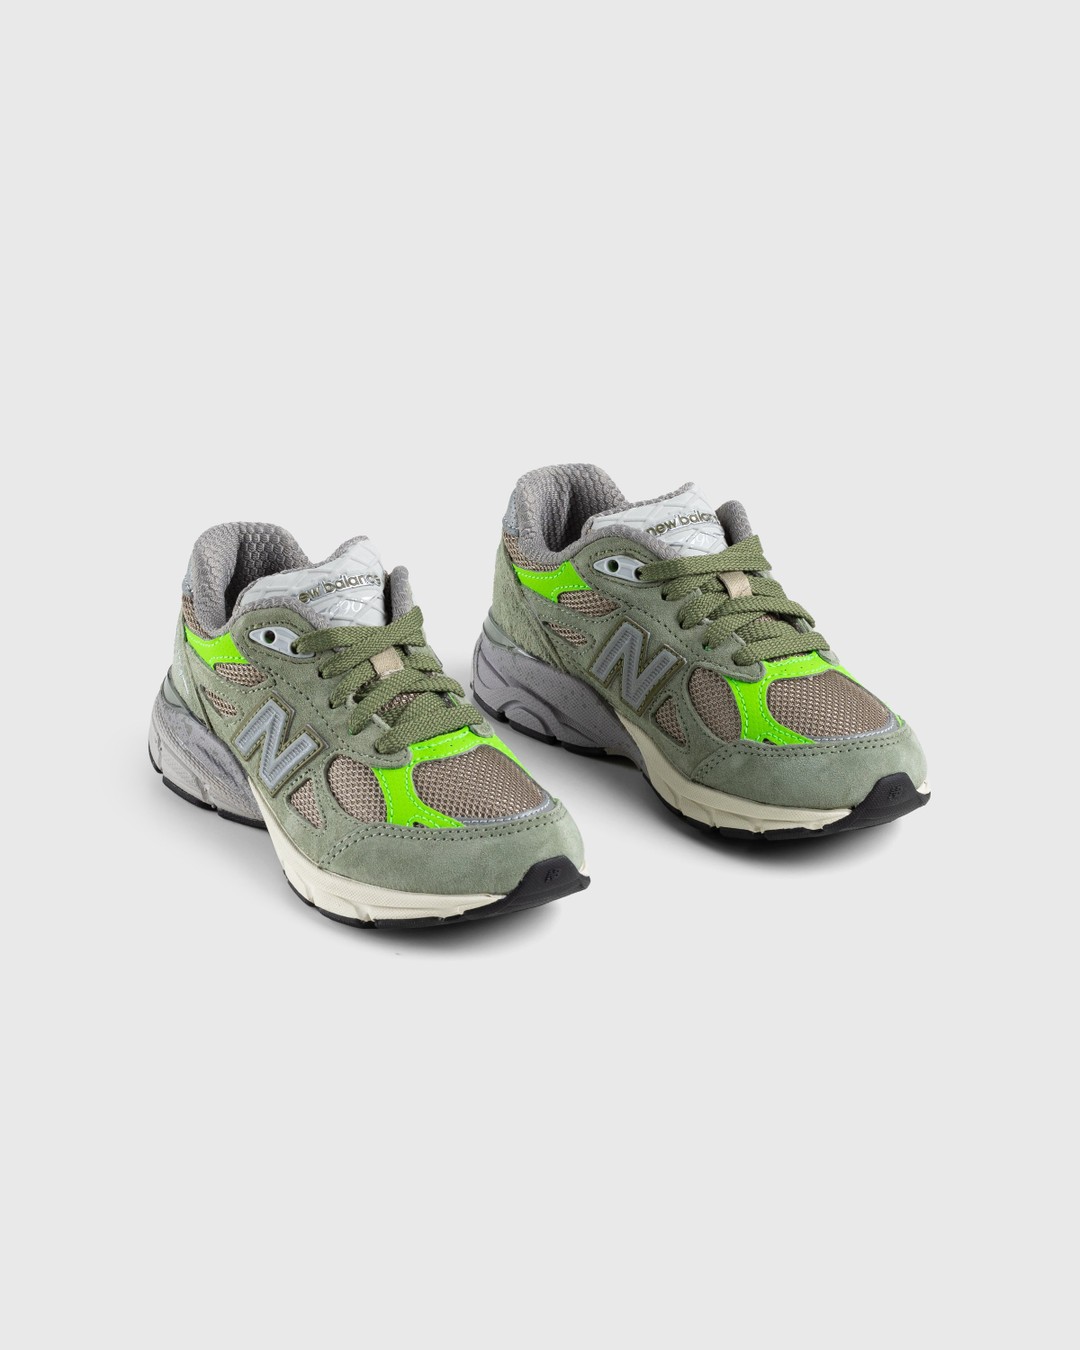 Patta x New Balance – Made in USA 990v3 Olive/White Pepper - Sneakers - Green - Image 3